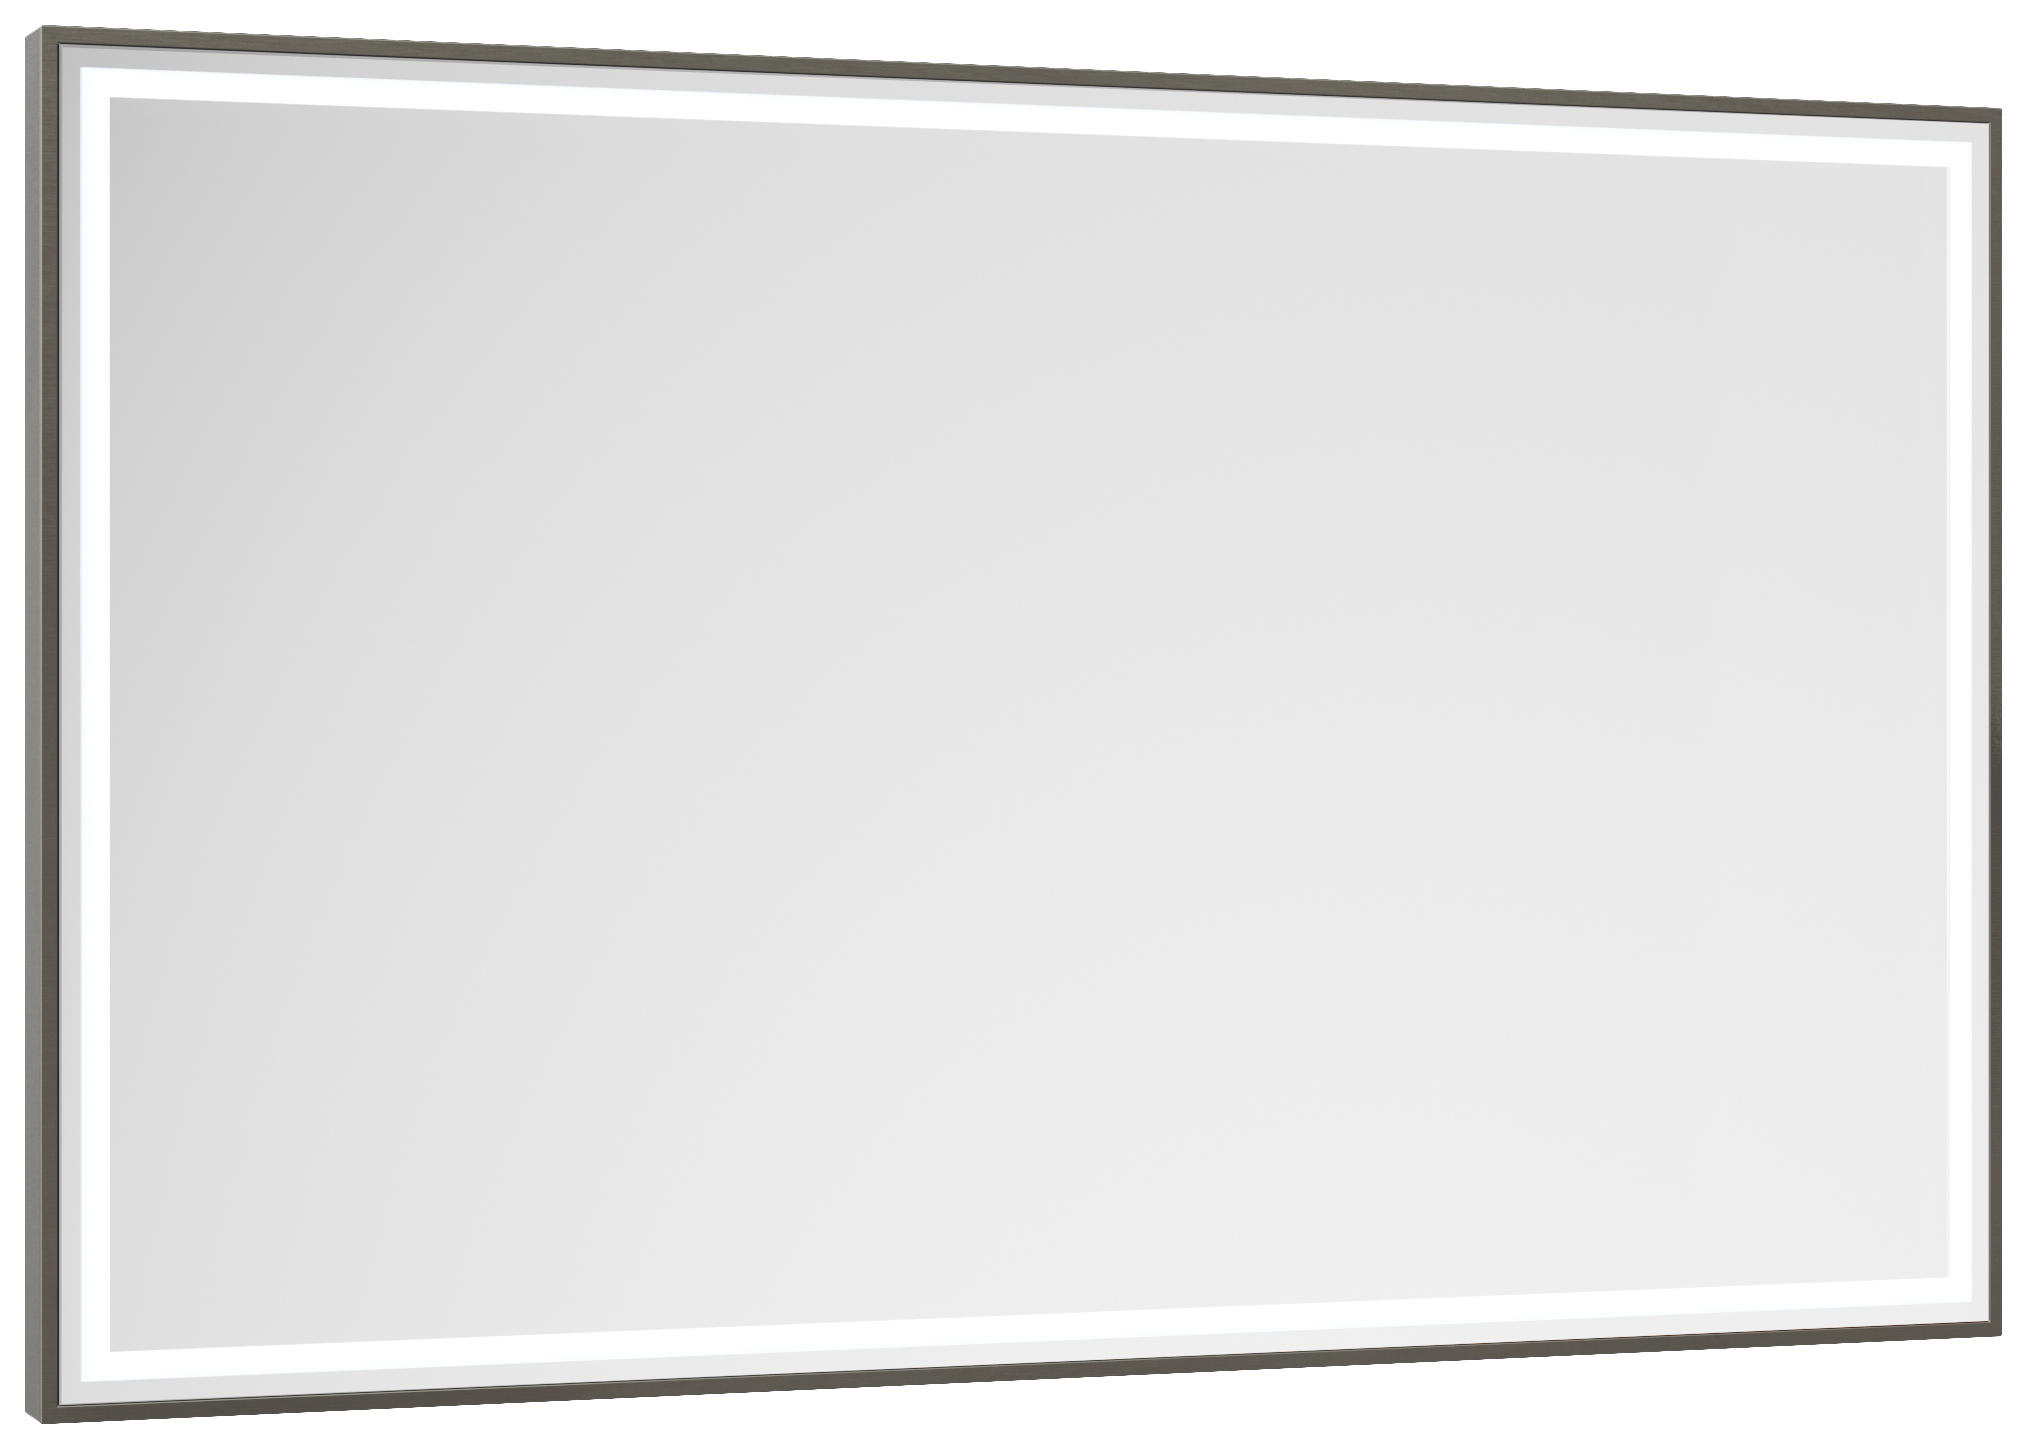 Image of Abacus Melford Anthracite LED Mirror with Demister - 1200 x 600mm